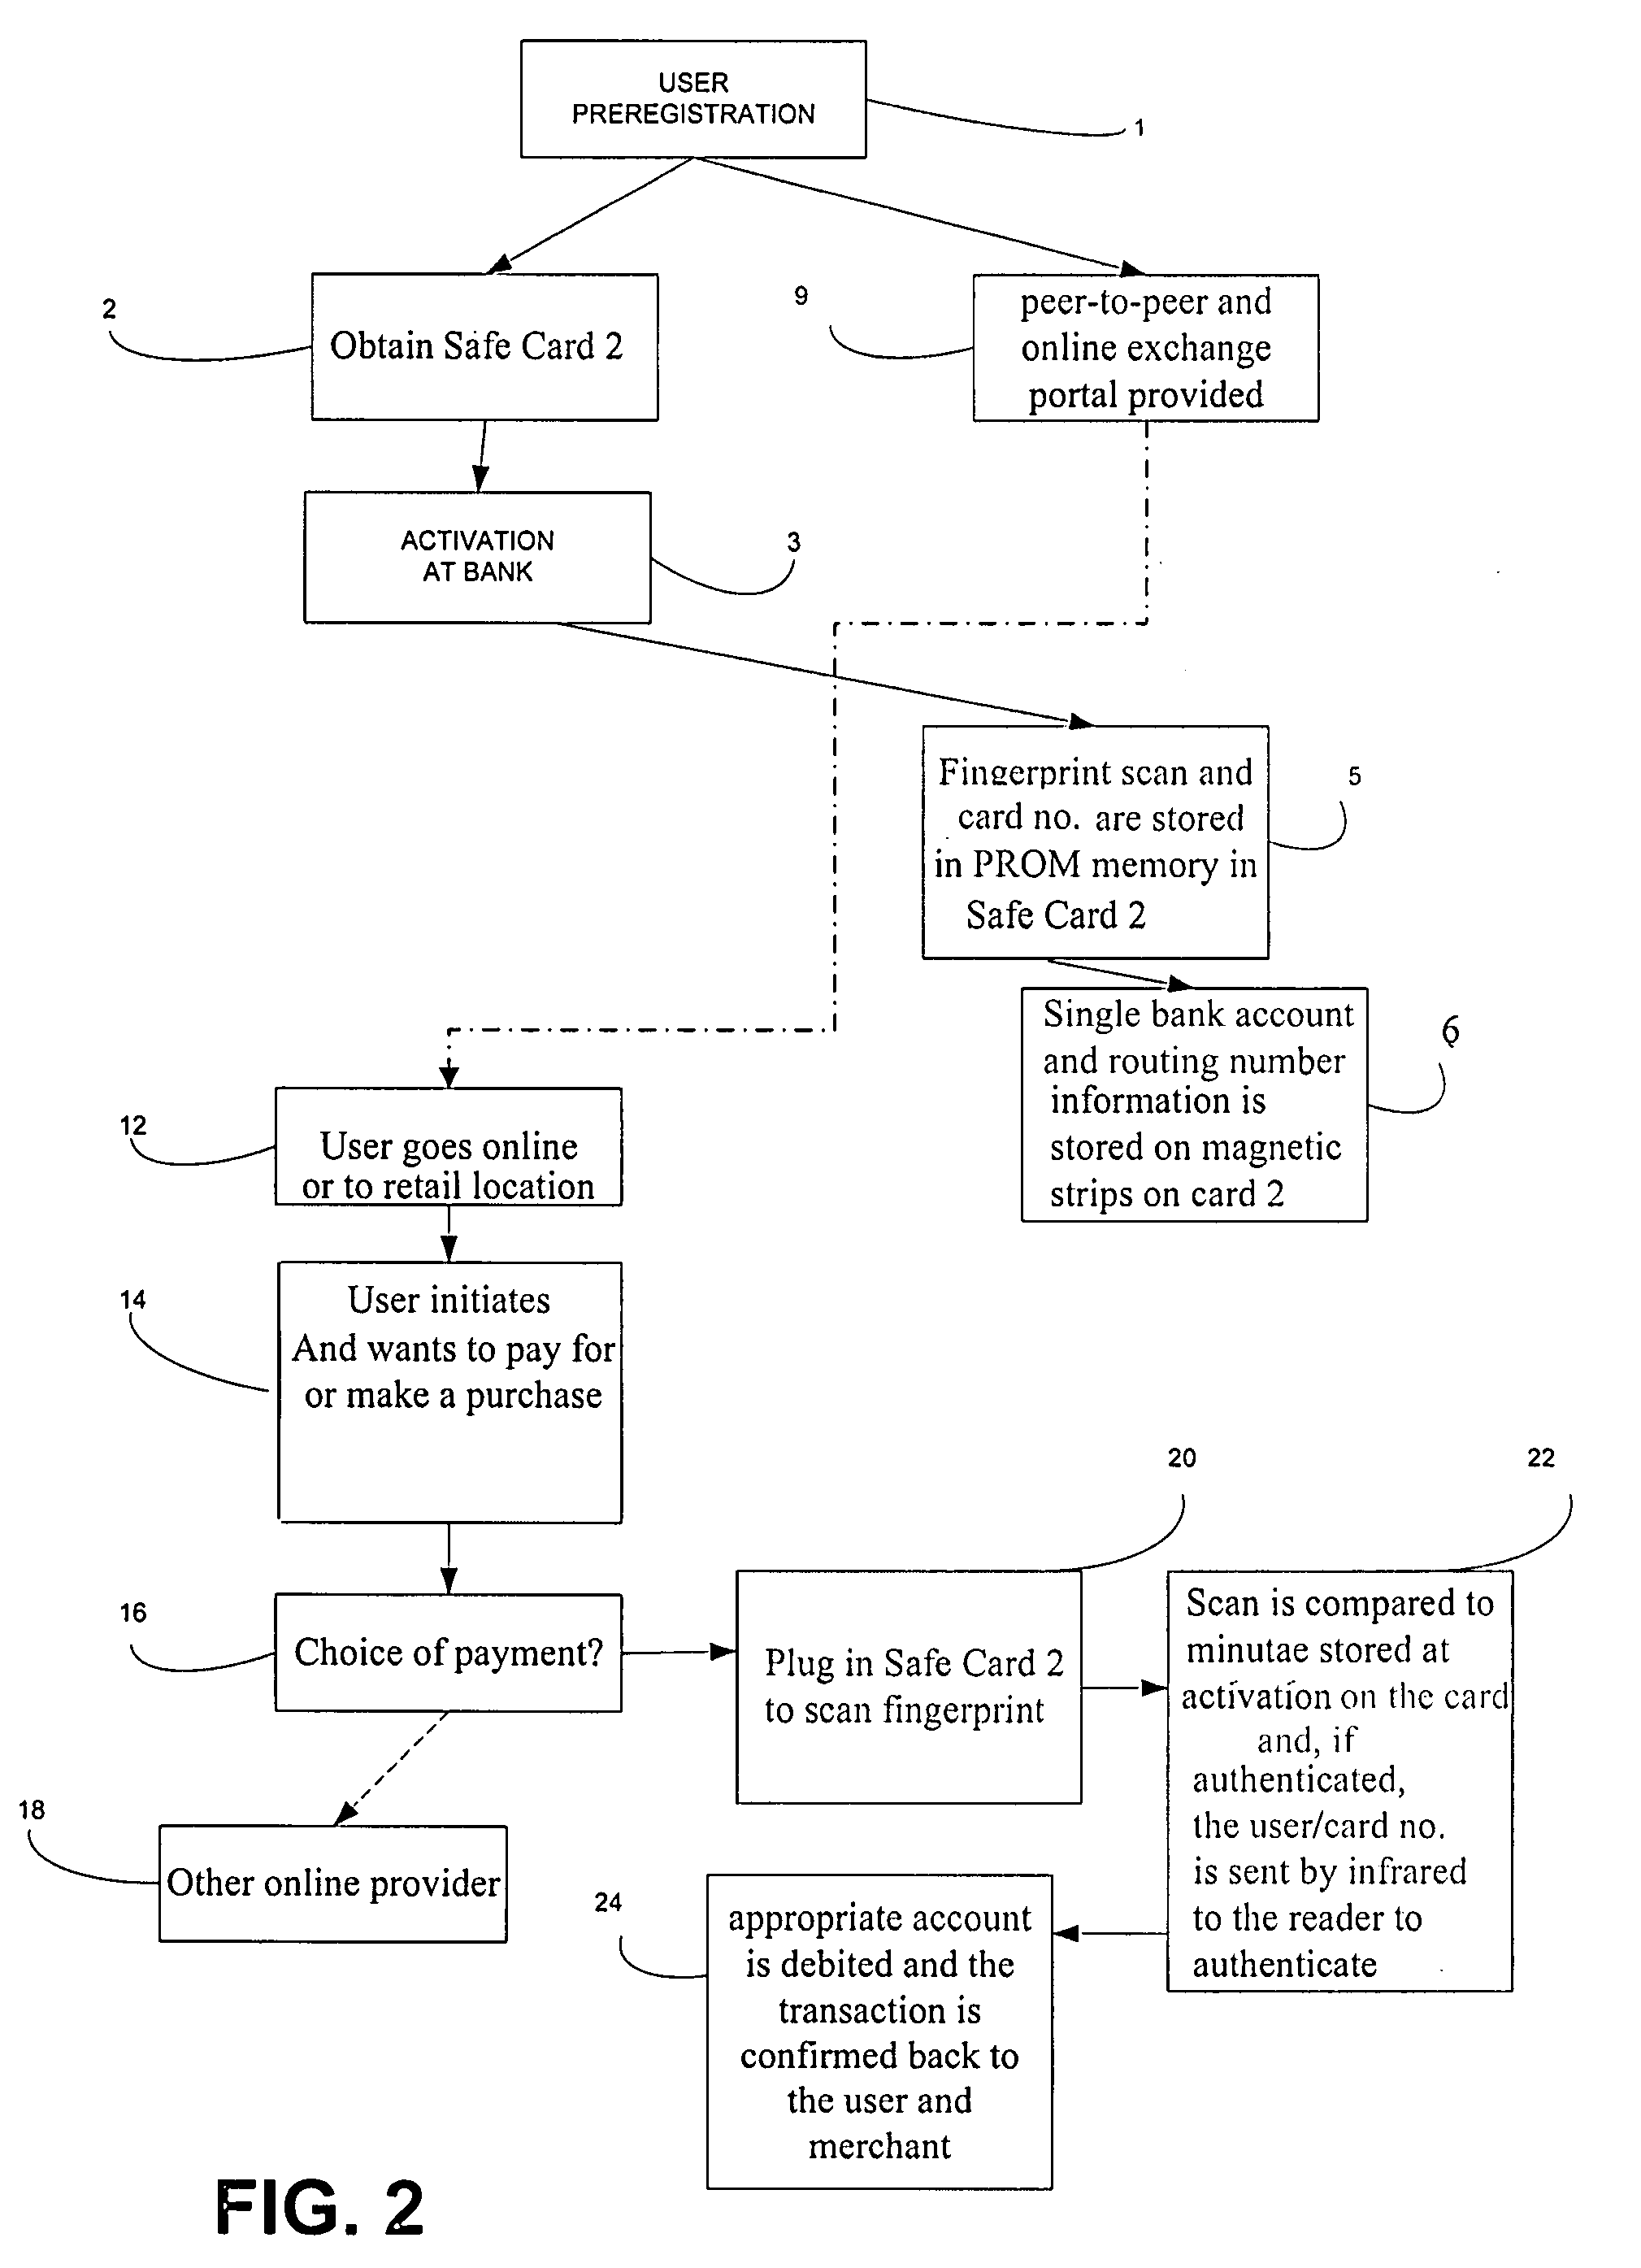 System for secure payment and authentication